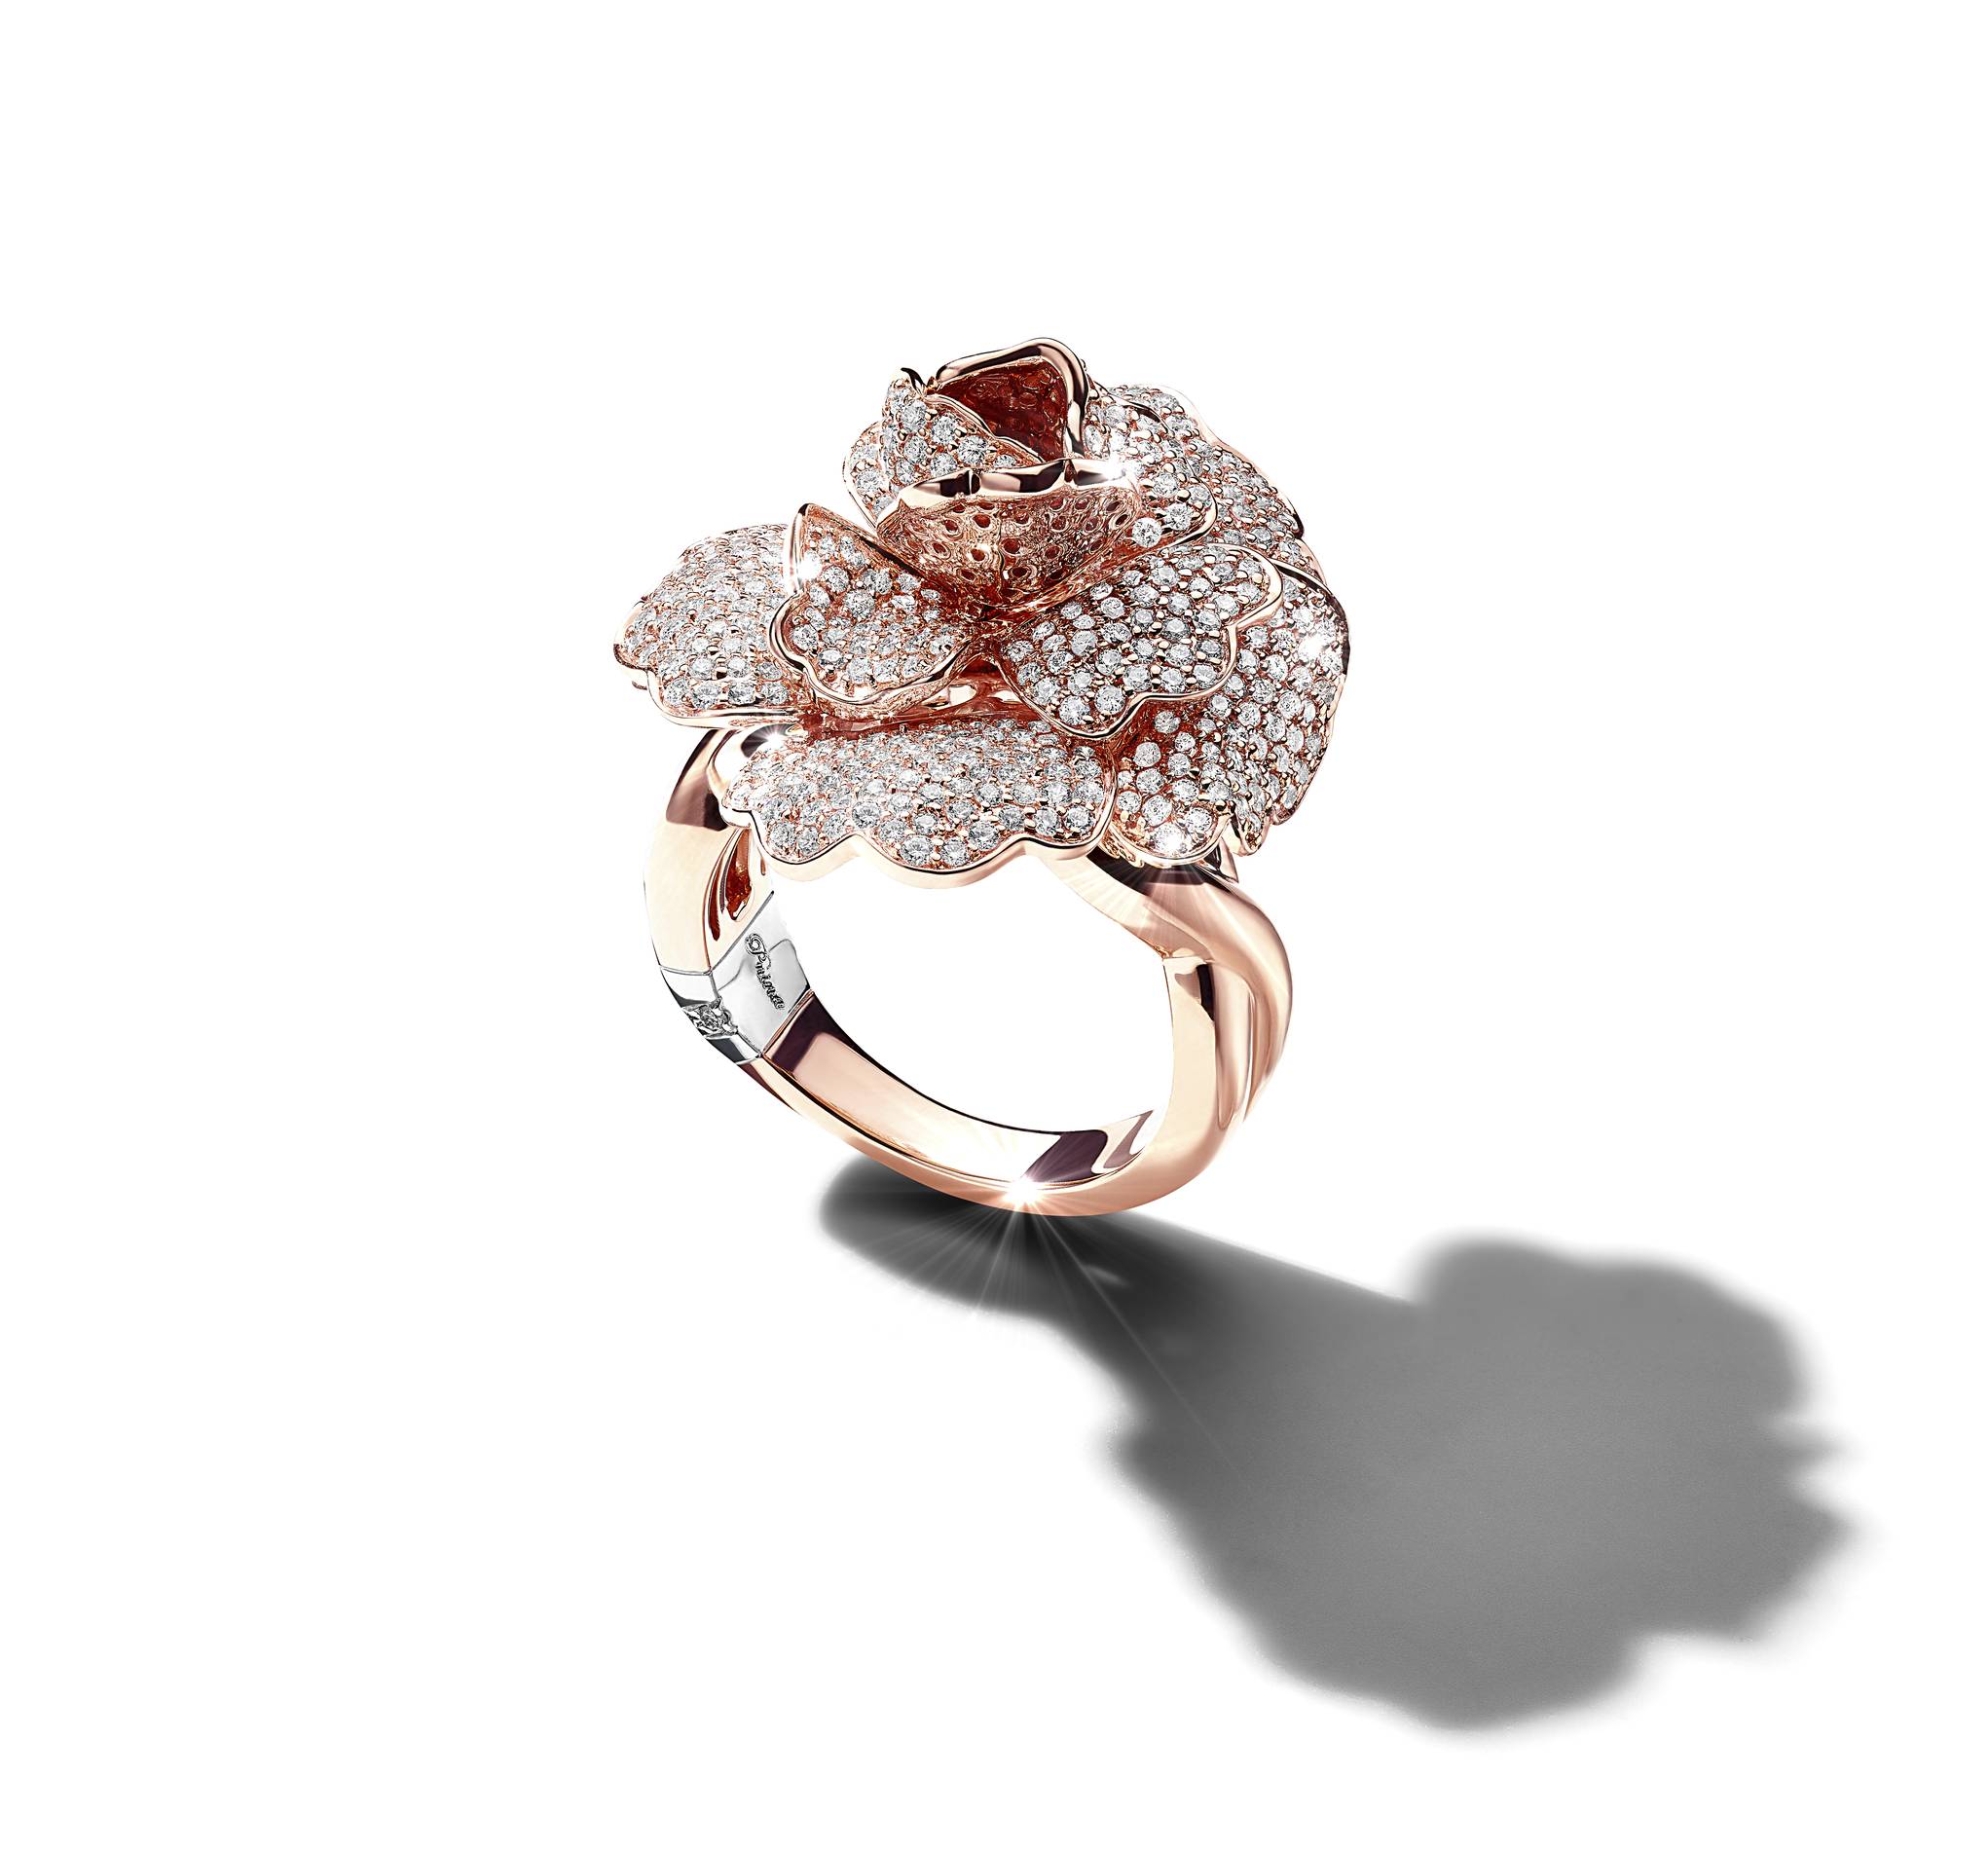 Pnina Tornai Jared jewelry collection rose ring